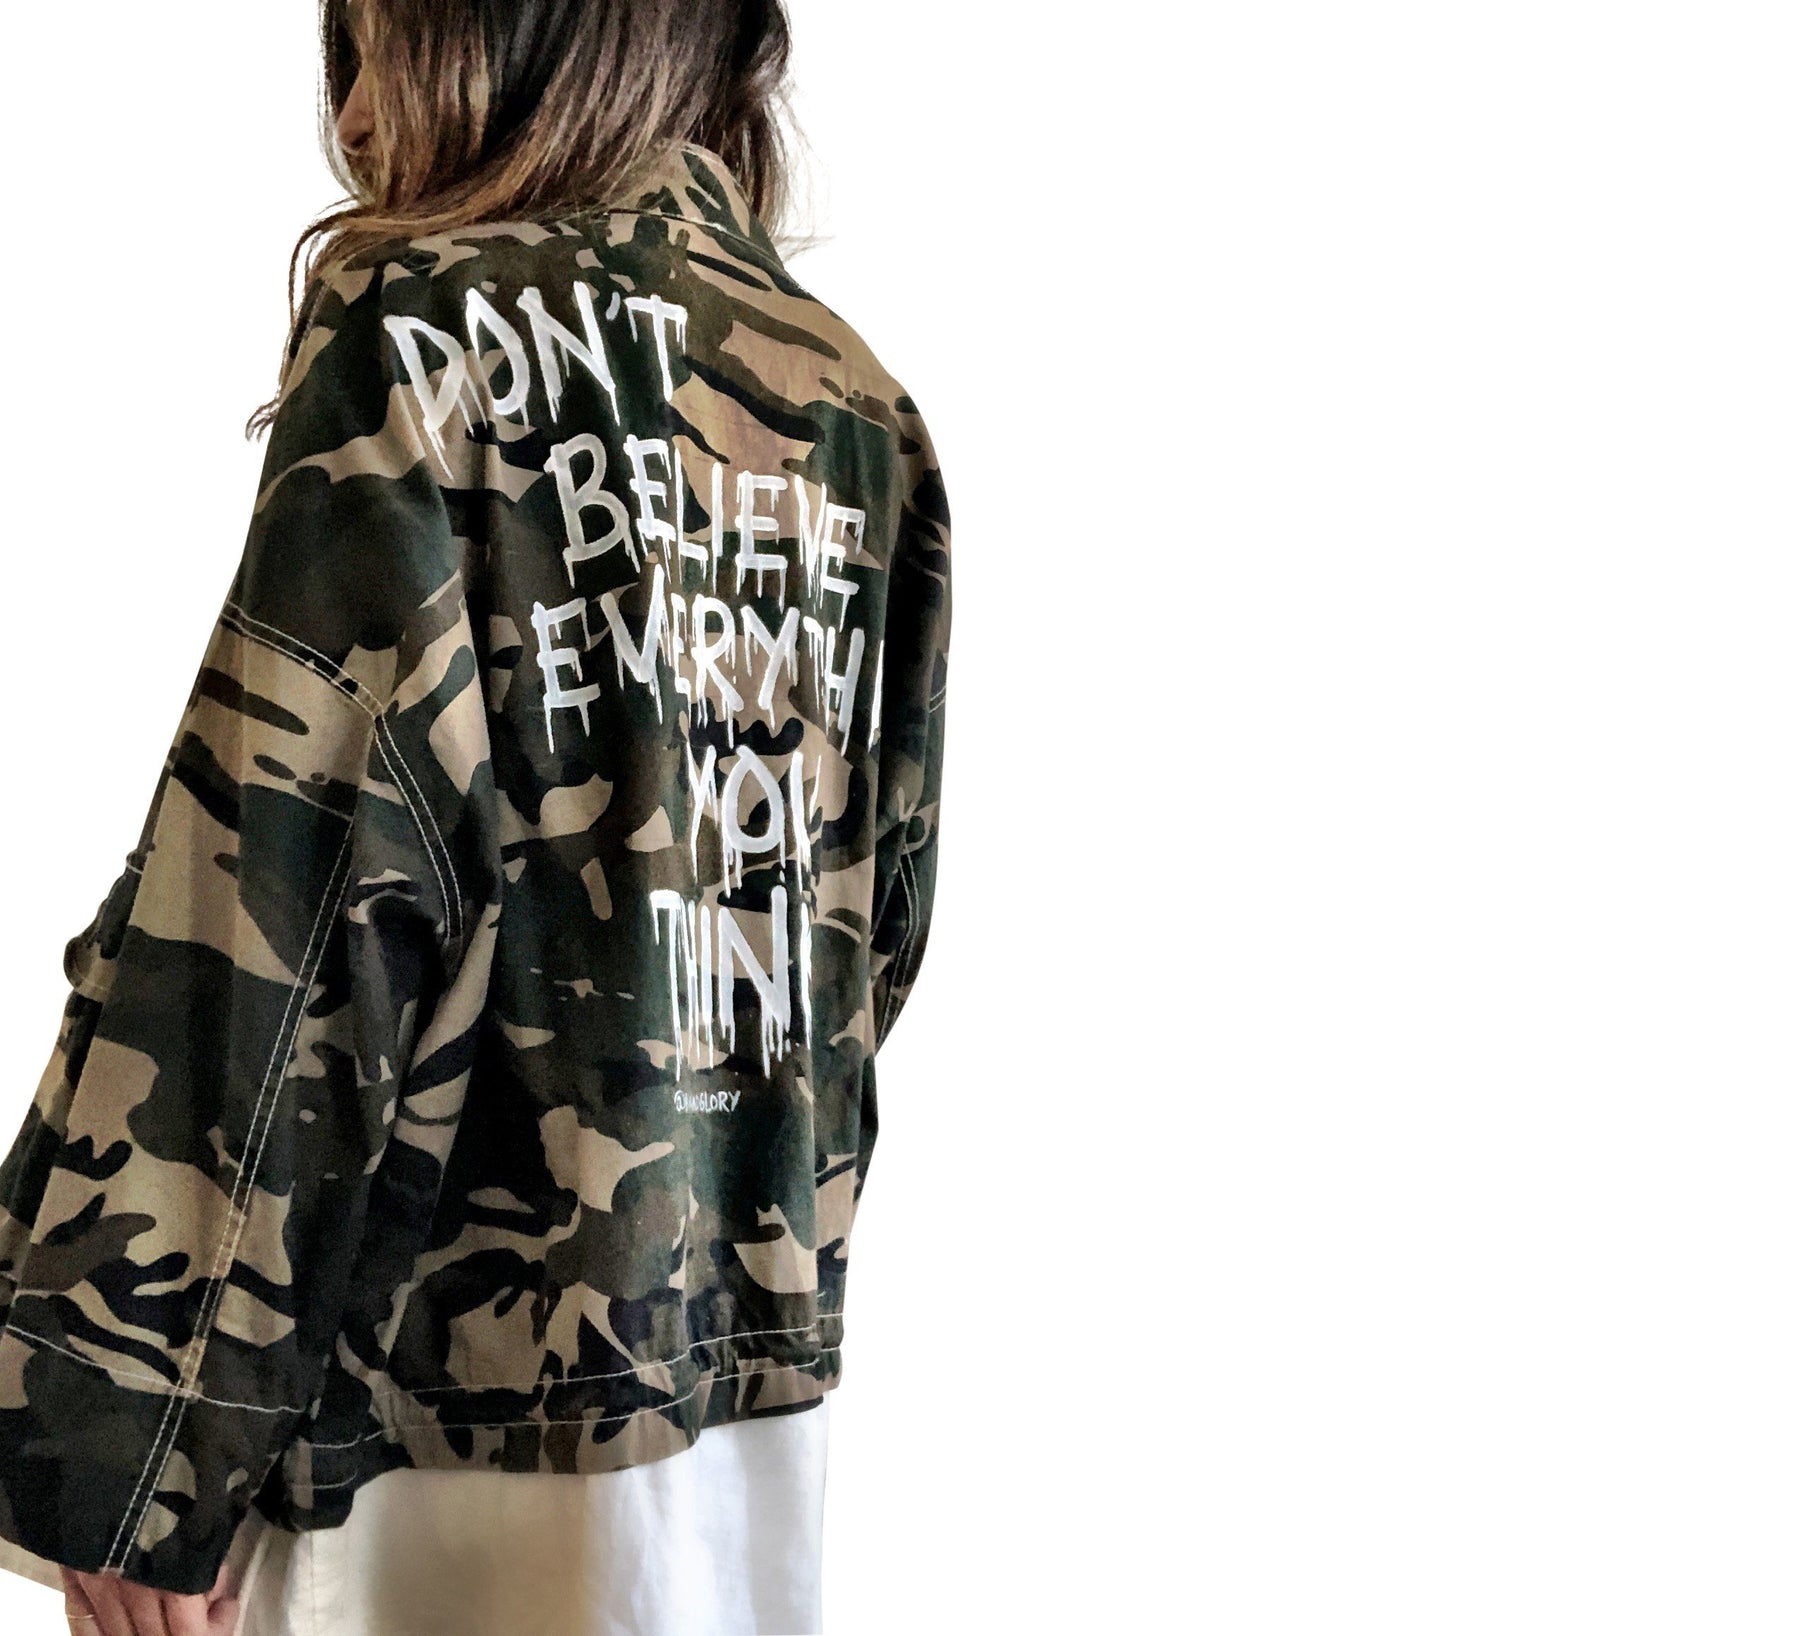 Camo print oversized denim jacket with off white layer inside. DON'T BELIEVE EVERYTHING YOU THINK painted on the back in white, drip effect font. Signed @wrenandglory.